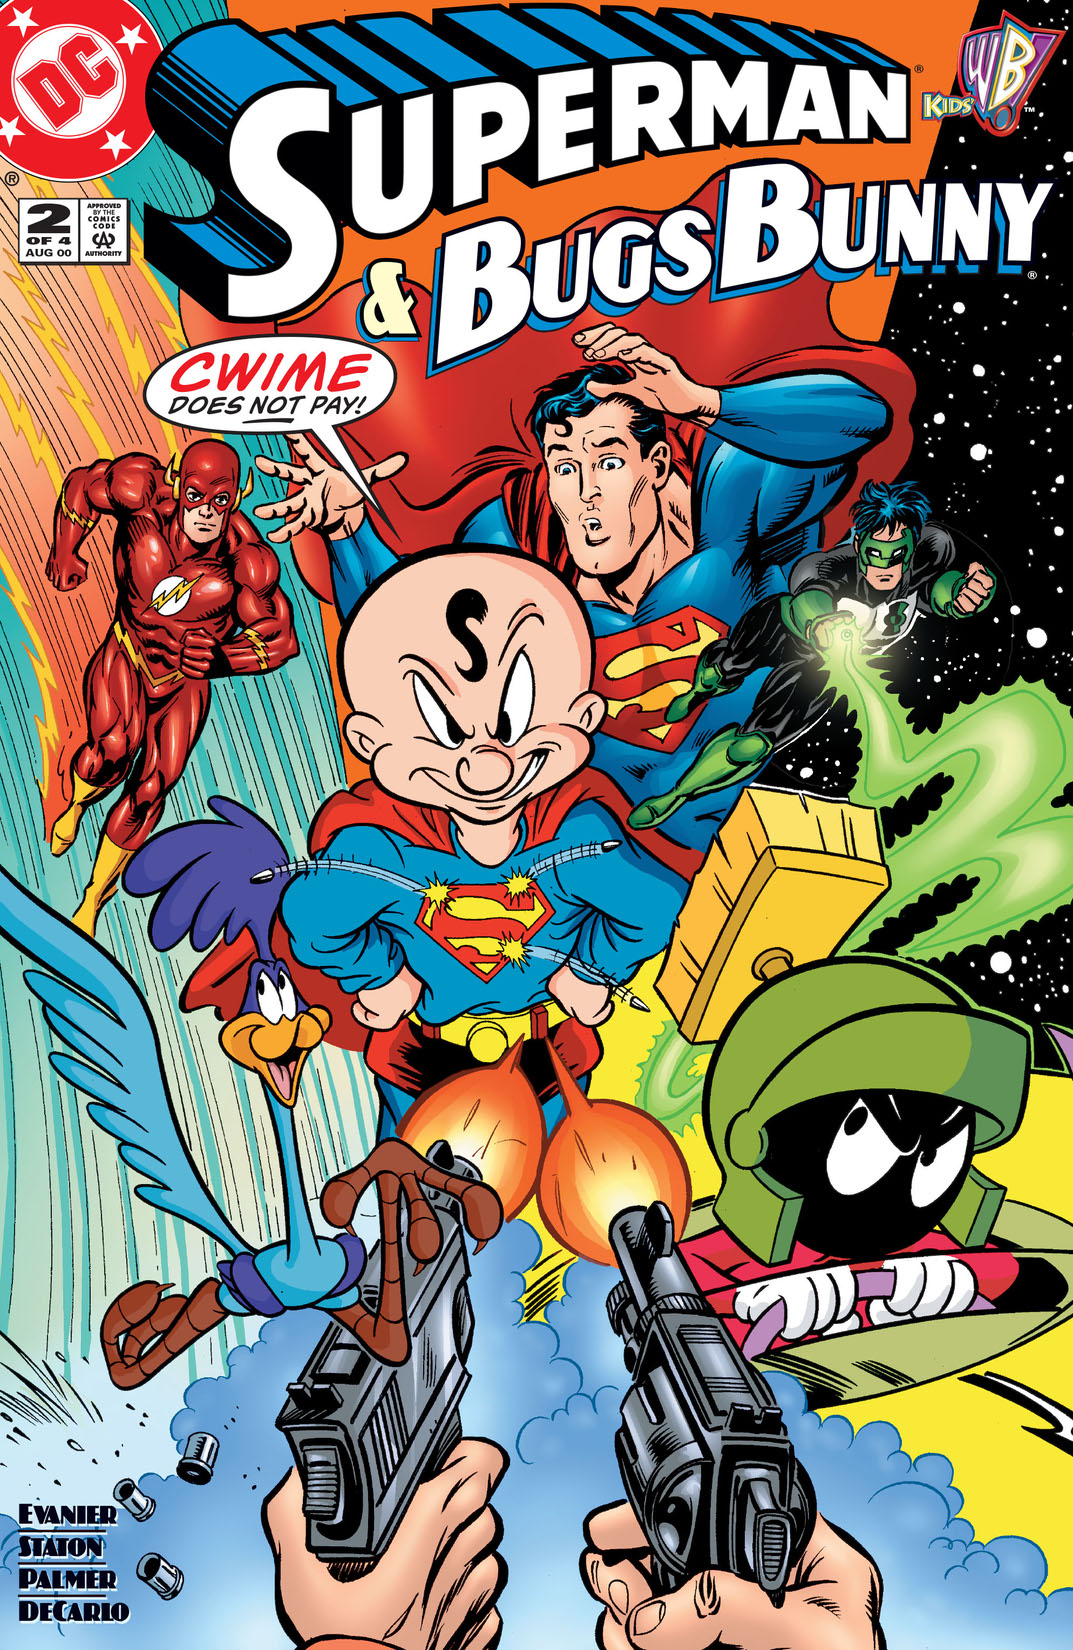 Superman & Bugs Bunny #2 preview images